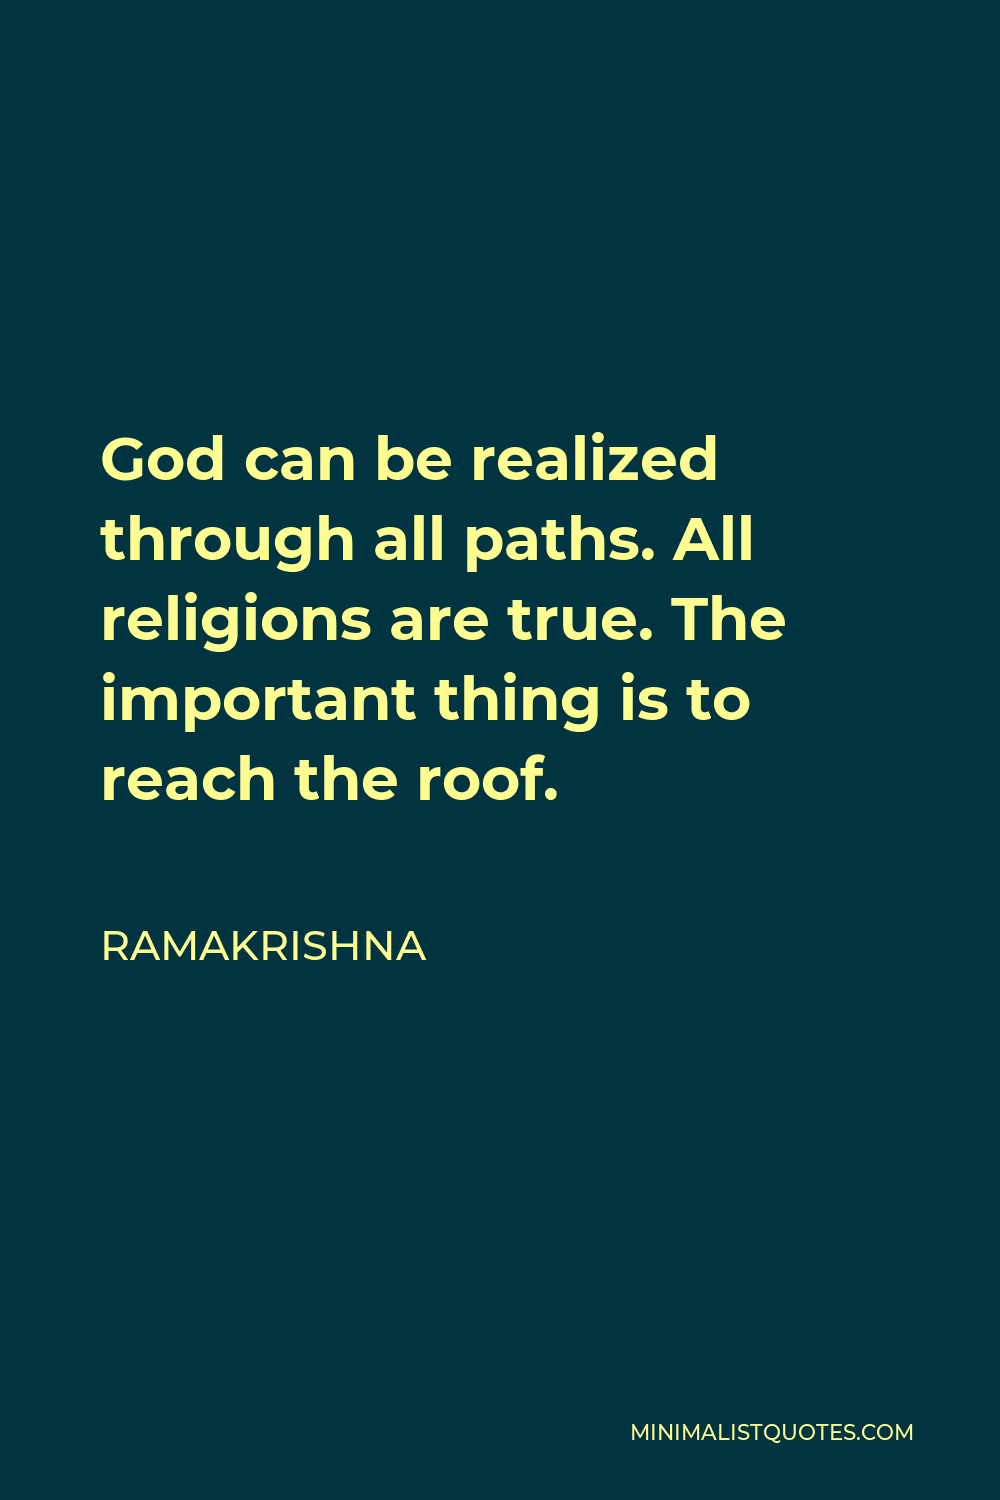 Ramakrishna Quote - God can be realized through all paths. All religions are true. The important thing is to reach the roof.